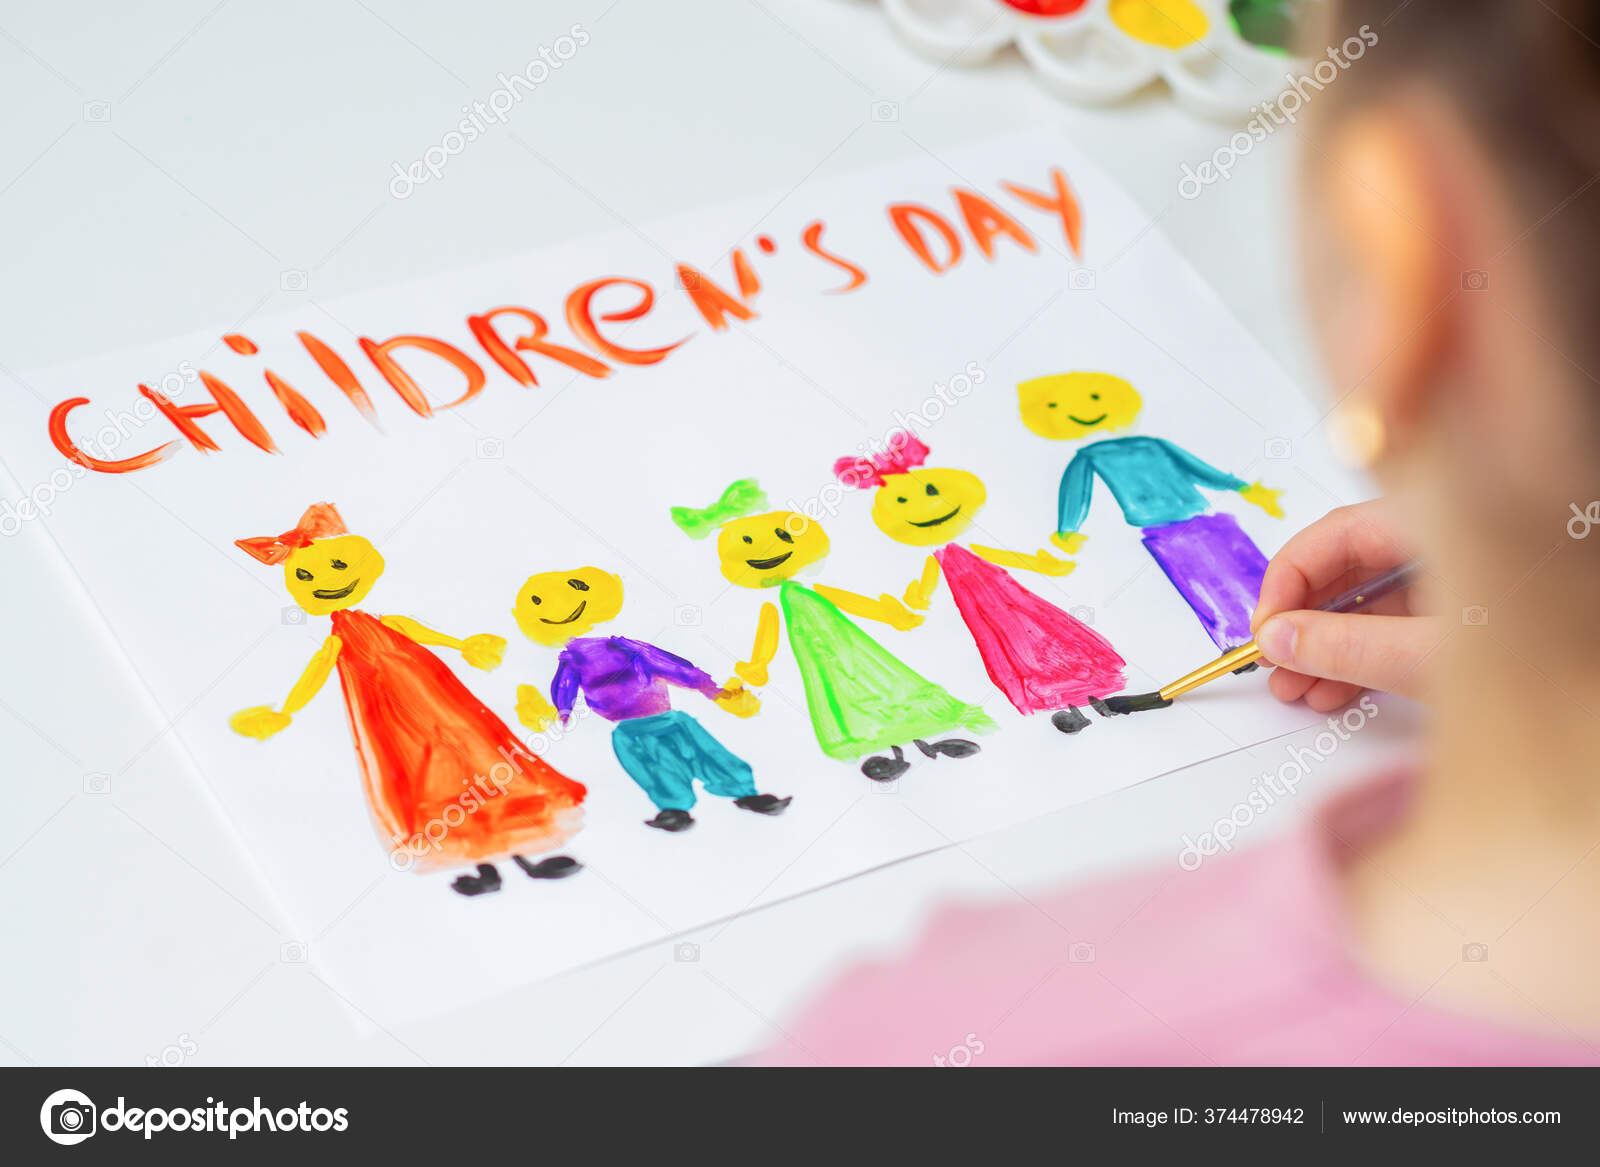 Childrens Day Sticky Sketch Hand Drawn Doodles Girl Play, Children's Day,  Stick Figure, Sketch PNG Hd Transparent Image And Clipart Image For Free  Download - Lovepik | 610460234